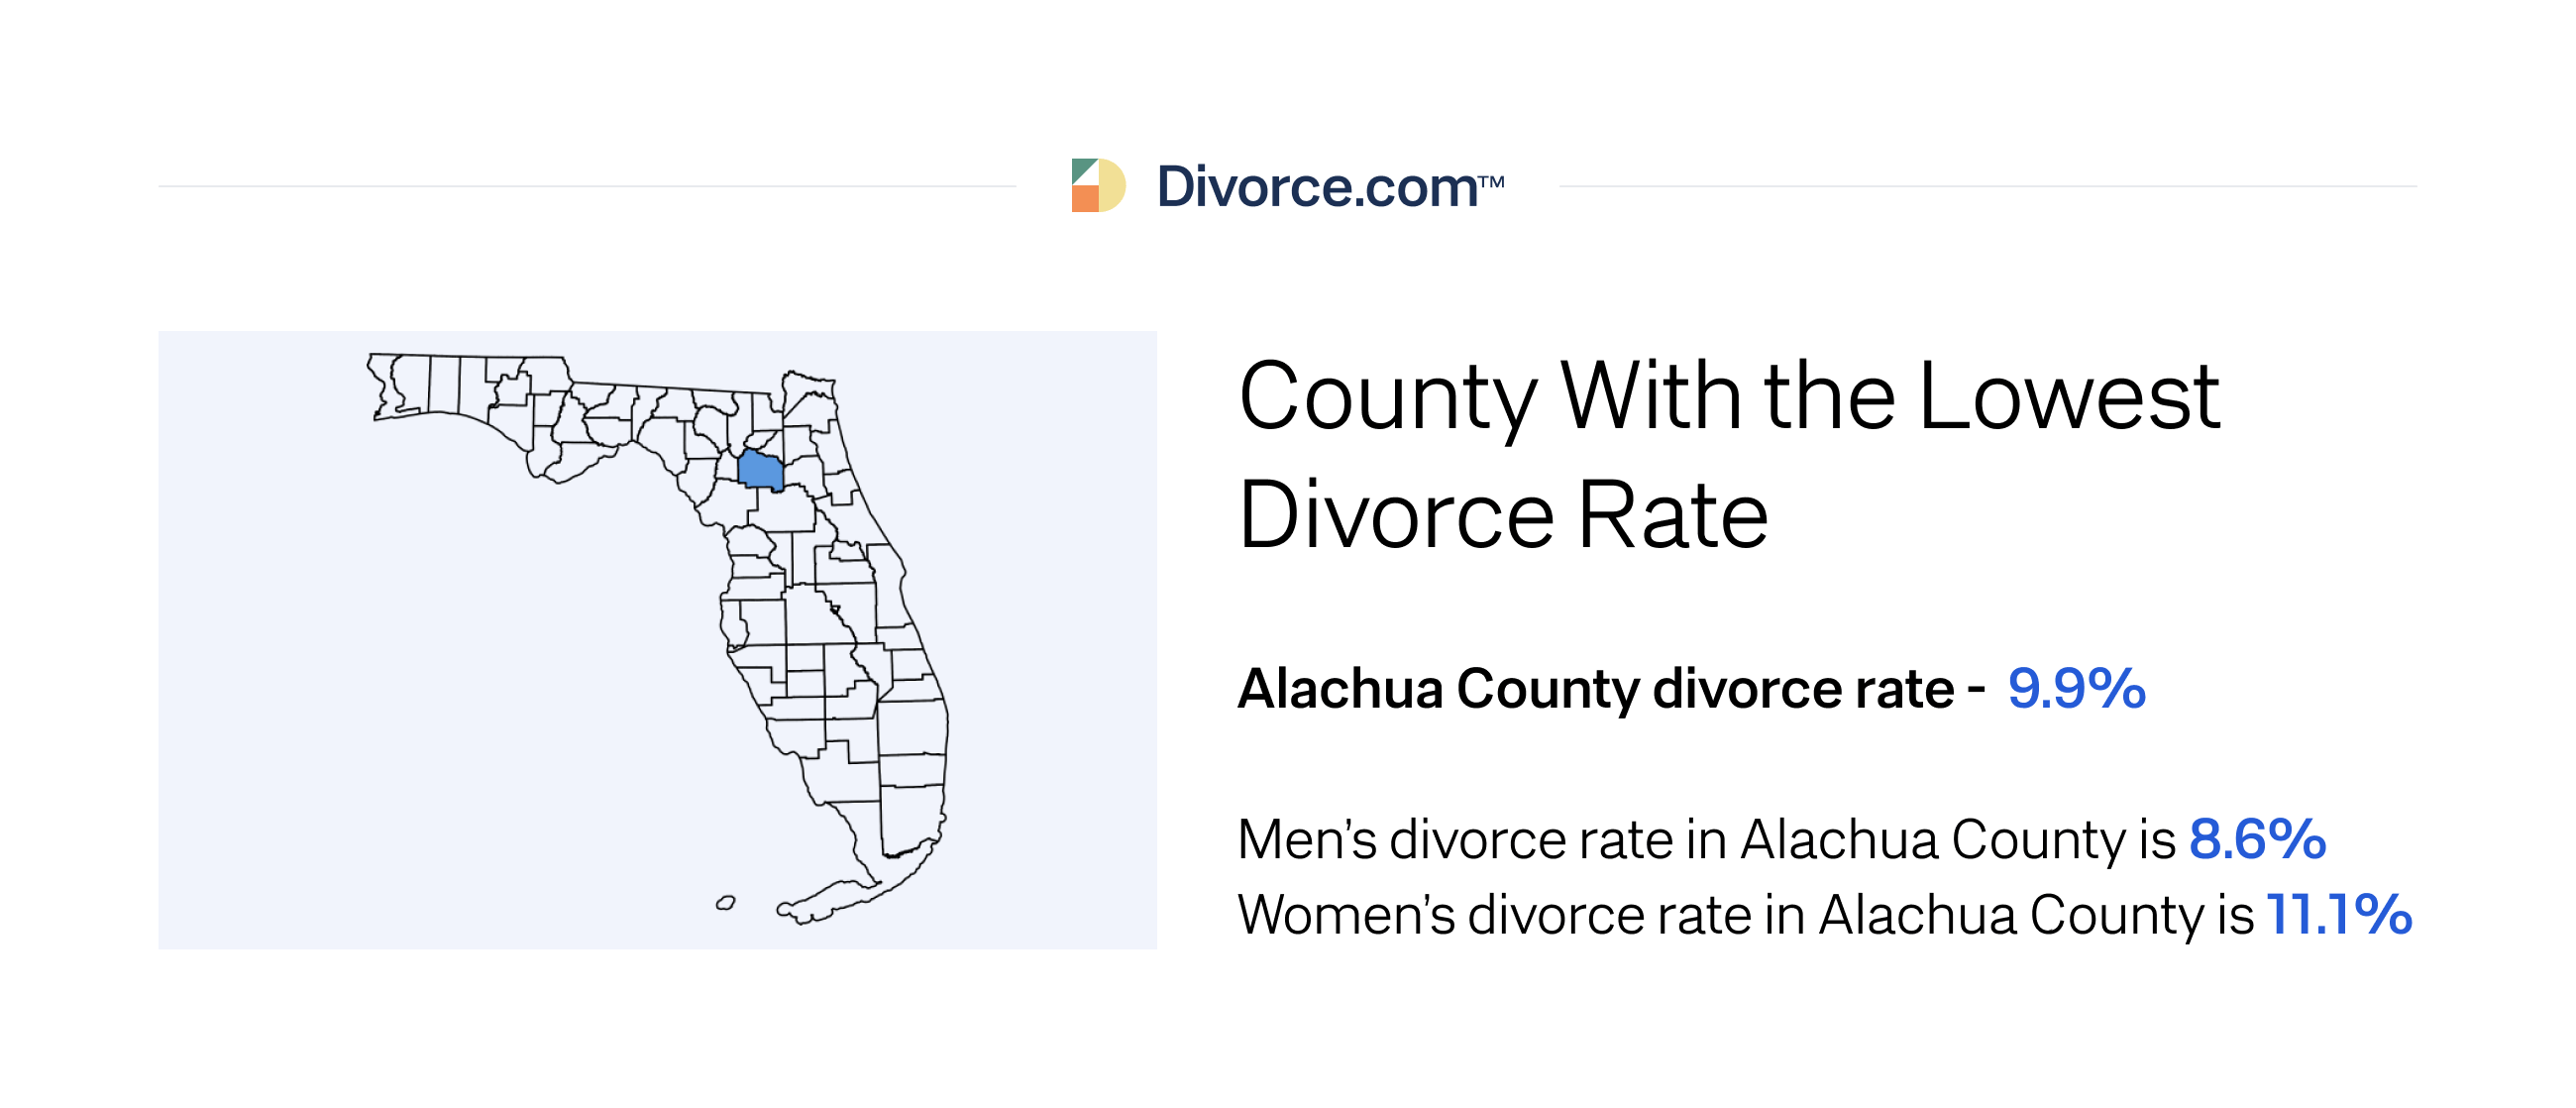 County With the Lowest Divorce Rate